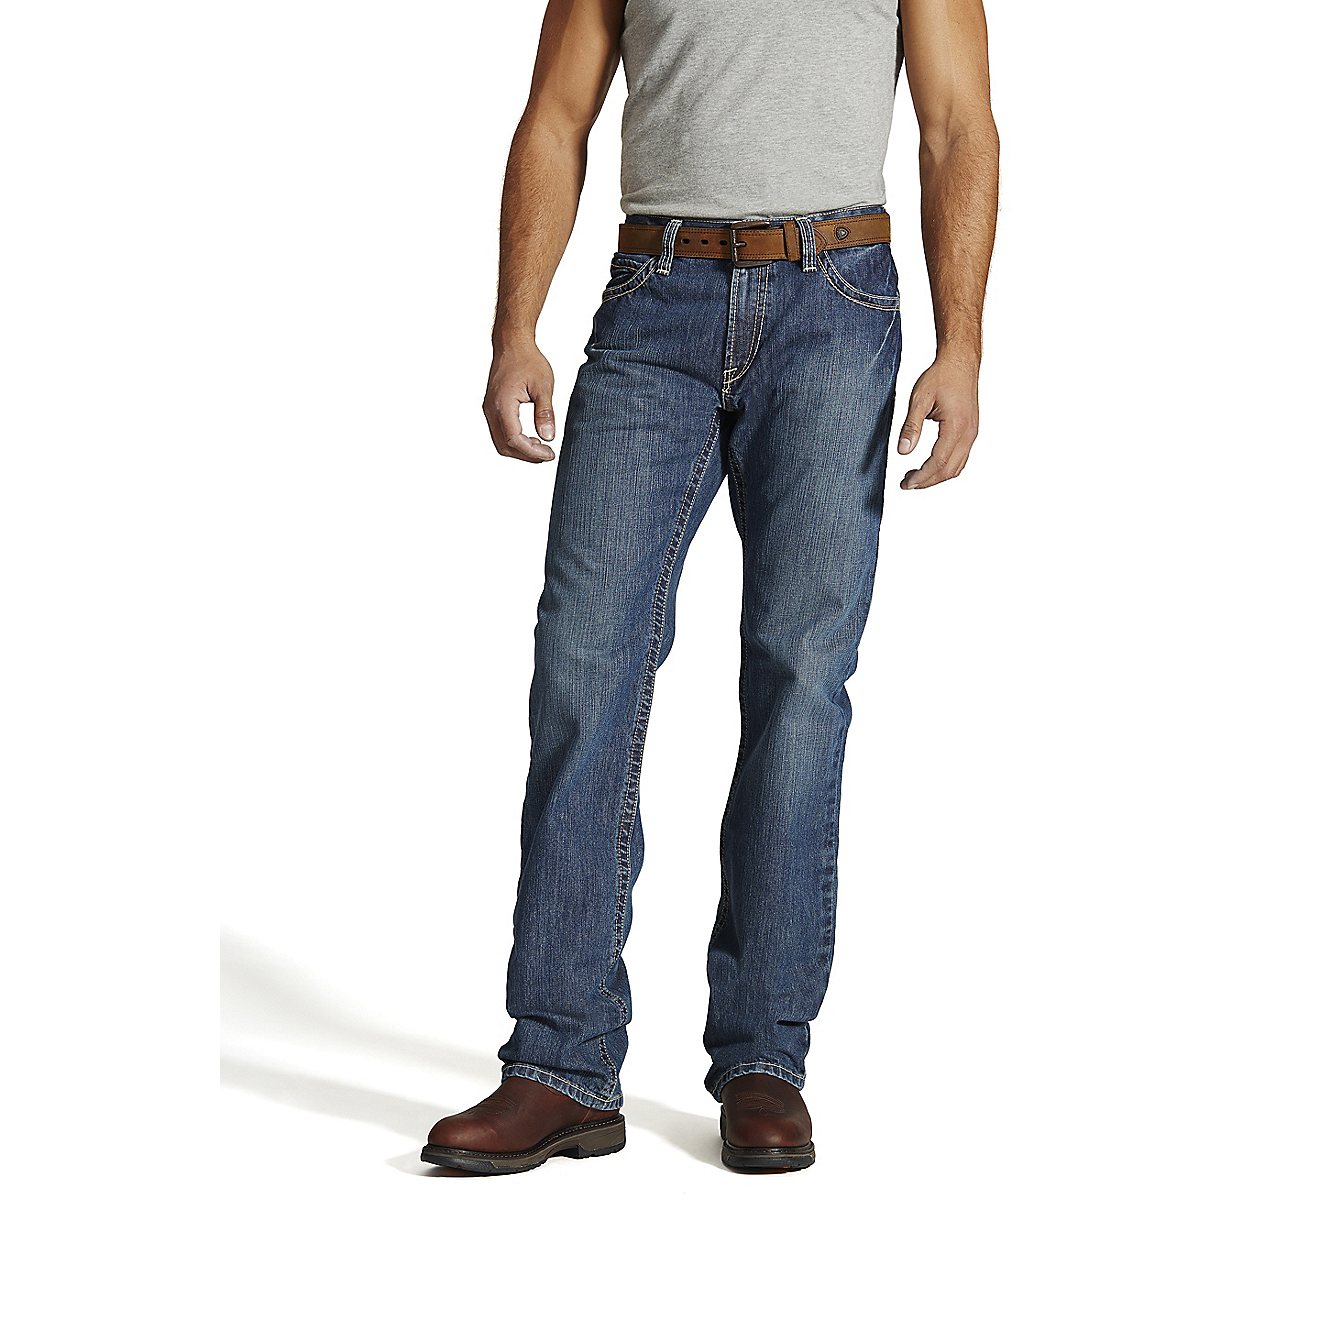 Ariat Men's M4 Flame-Resistant Jean | Free Shipping at Academy